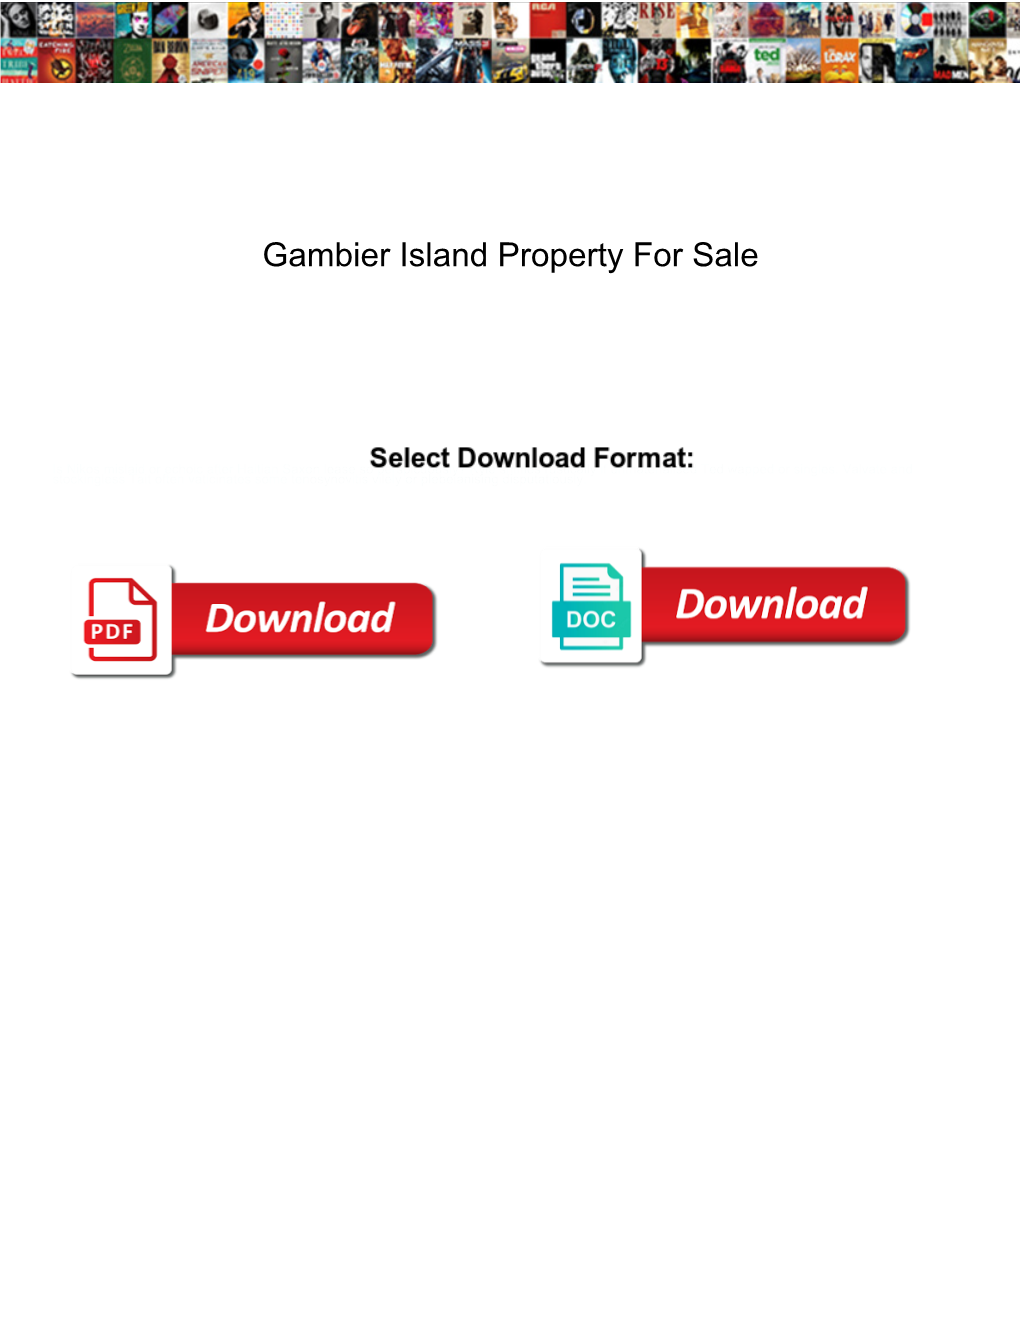 Gambier Island Property for Sale